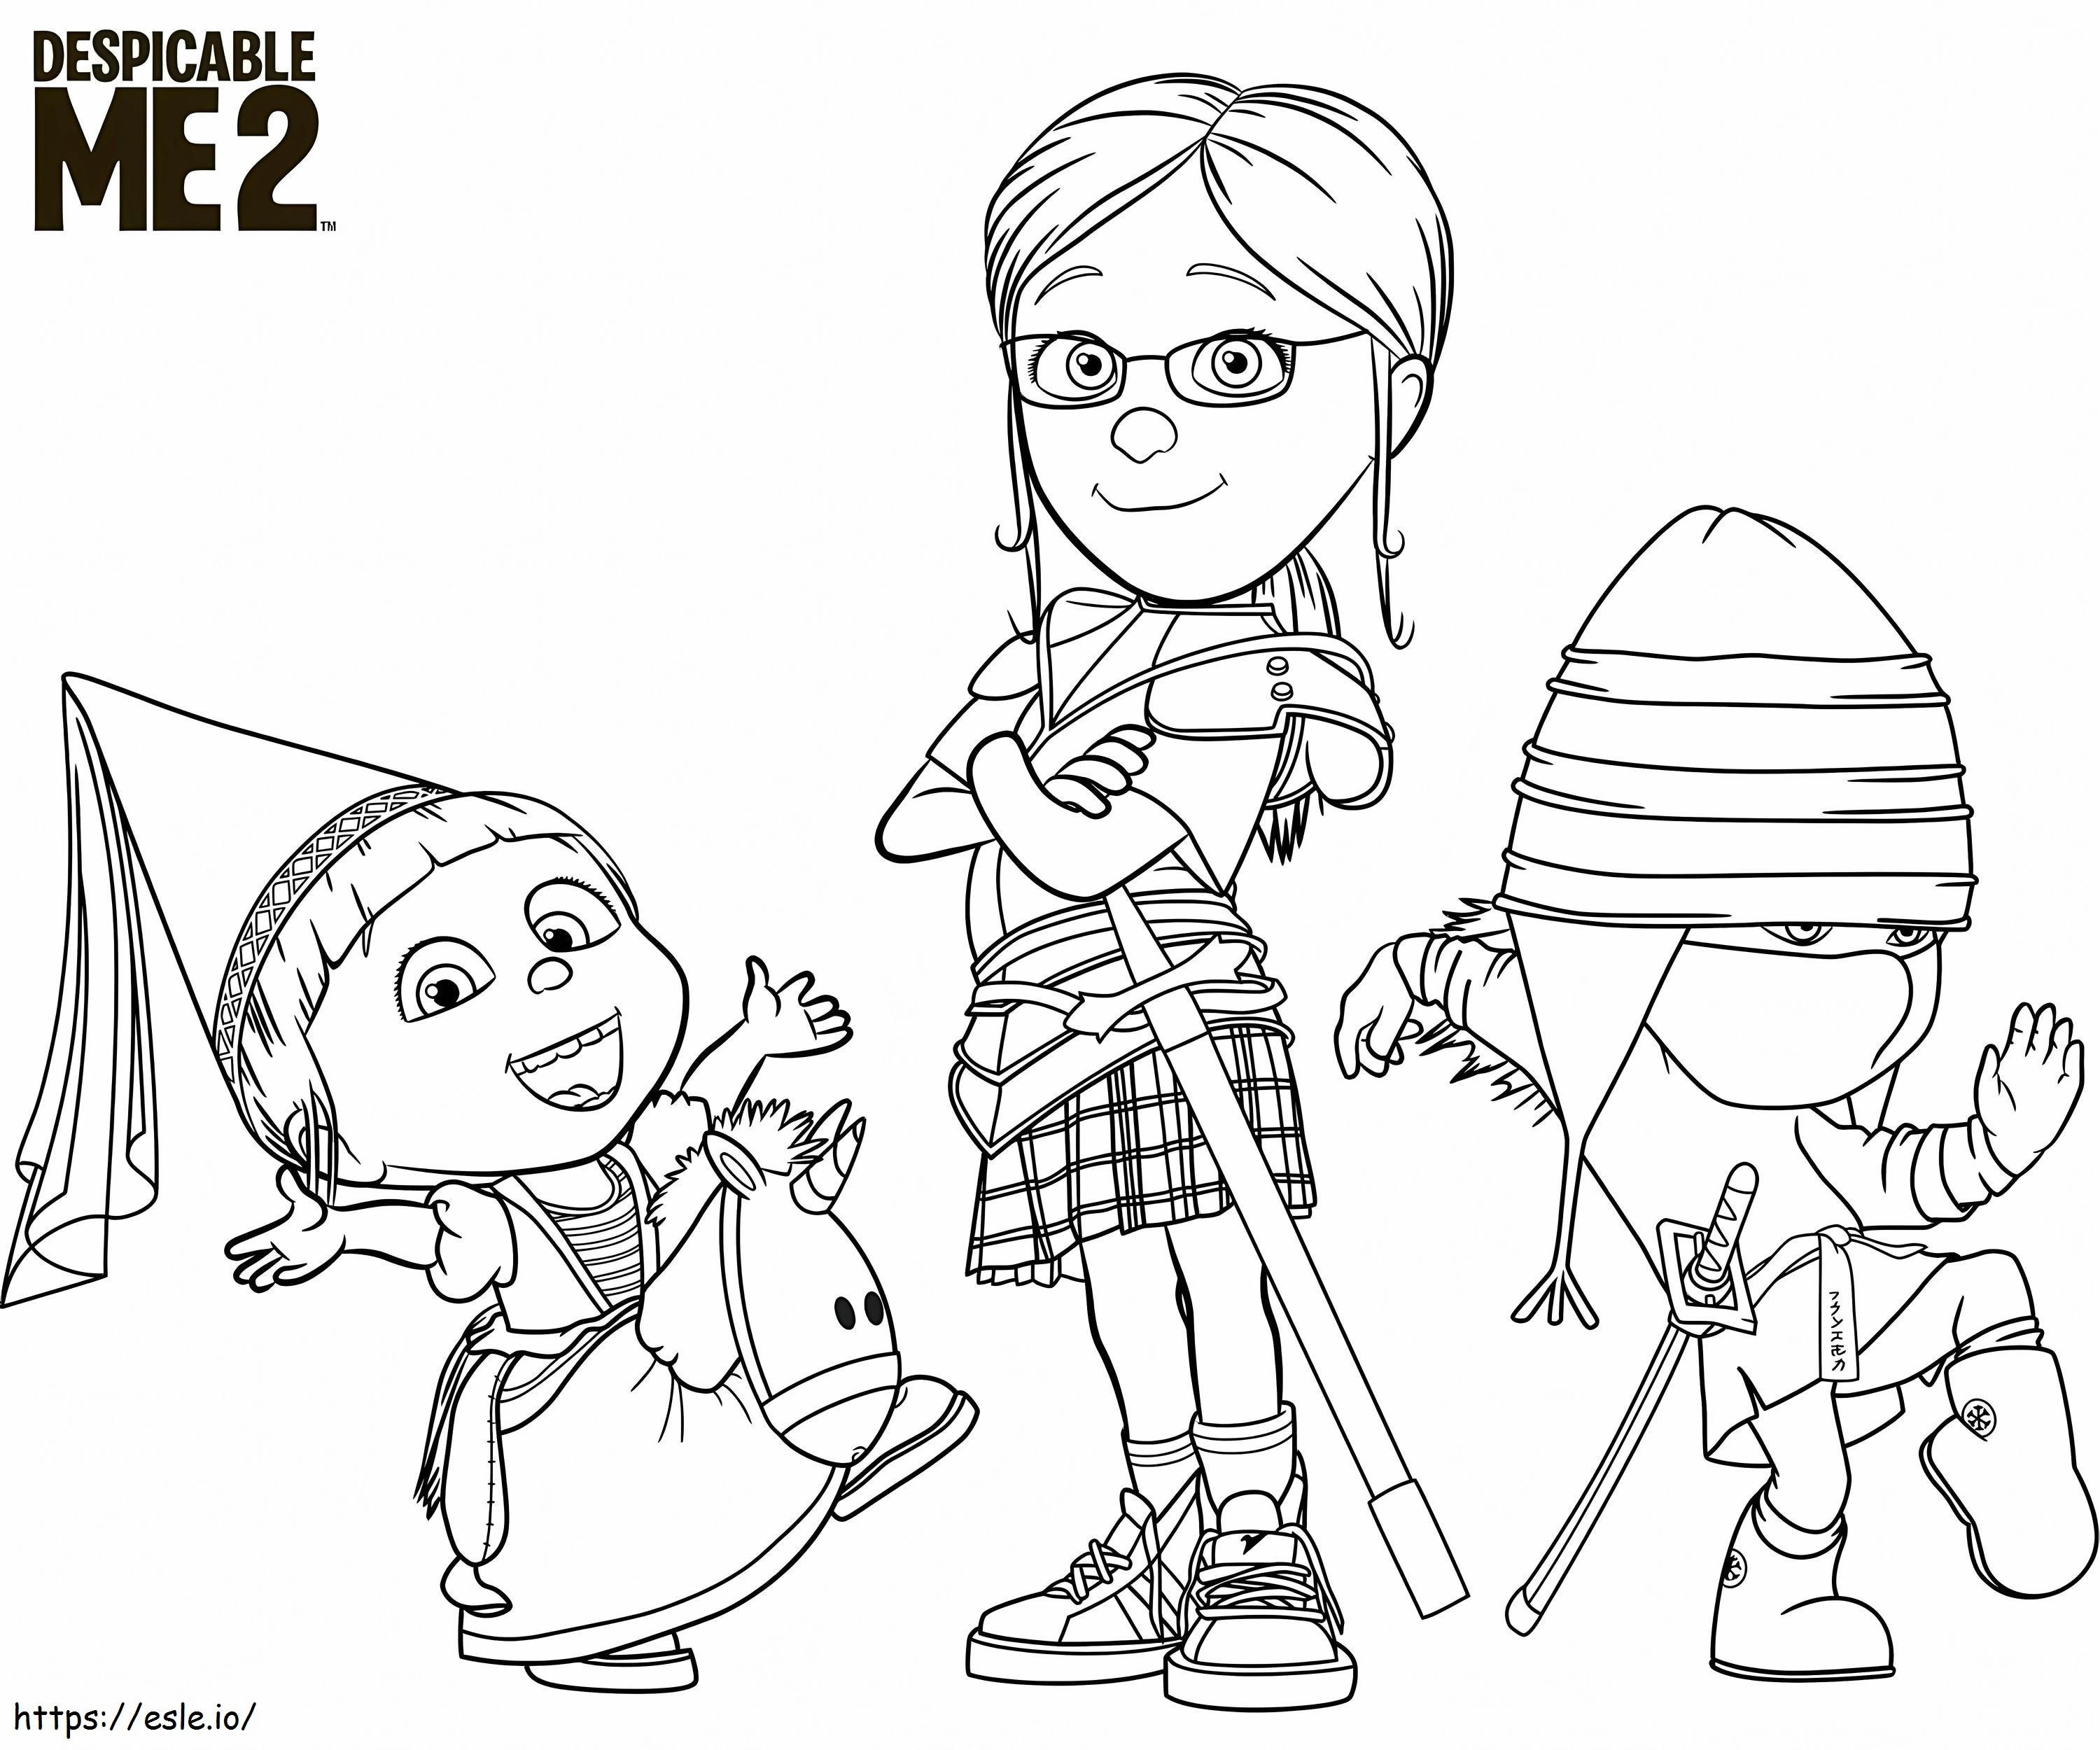 Kids From Despicable Me 2 kifestő